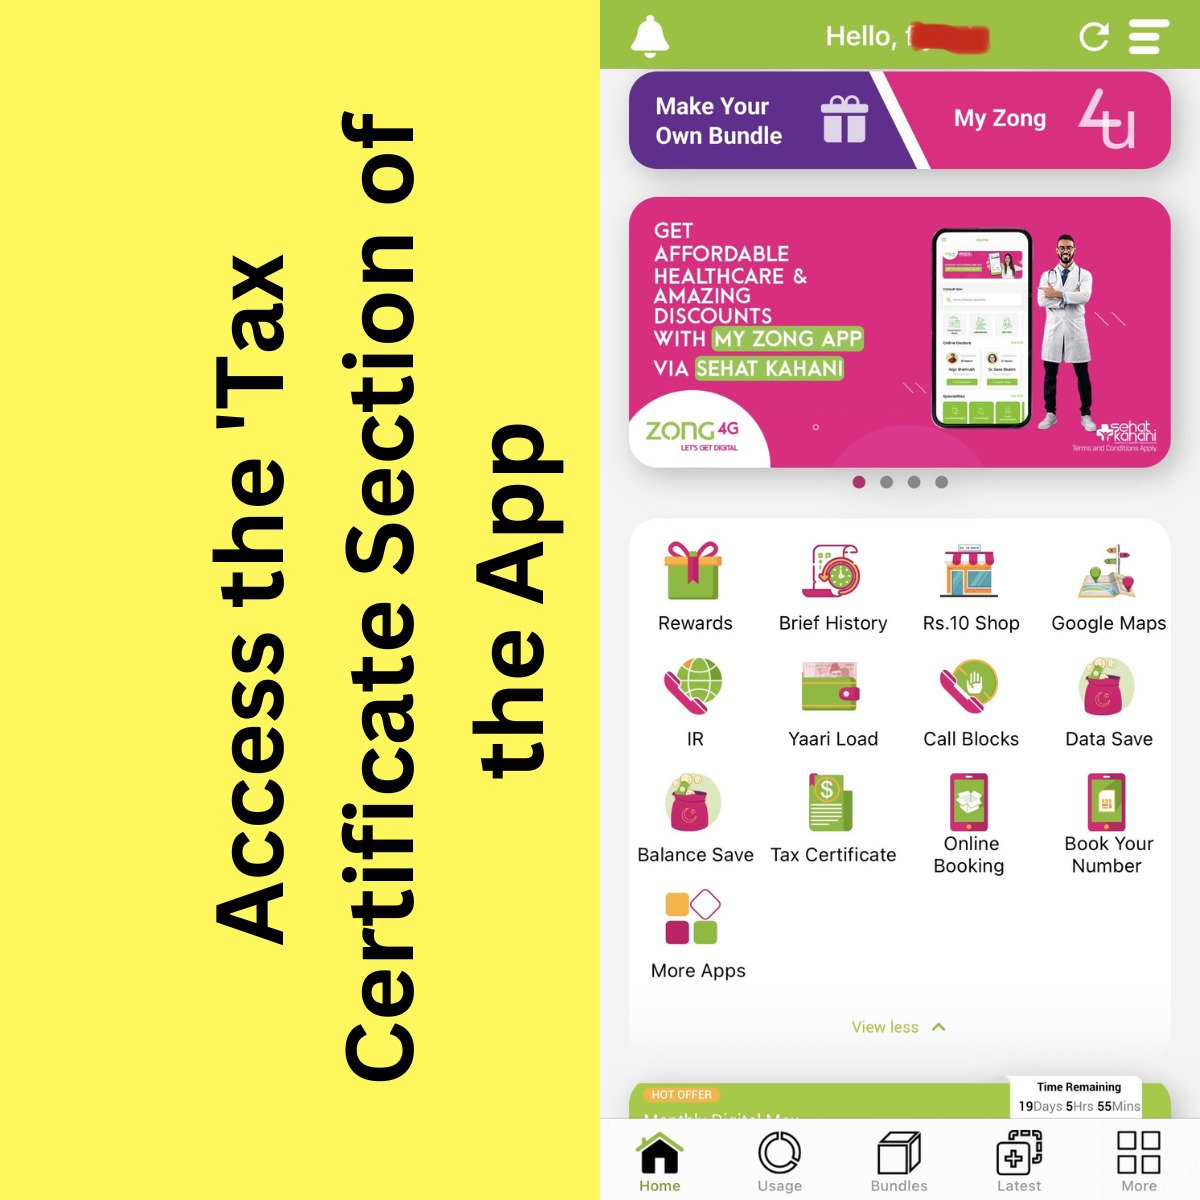 Access the tax certificate section of the my zong App